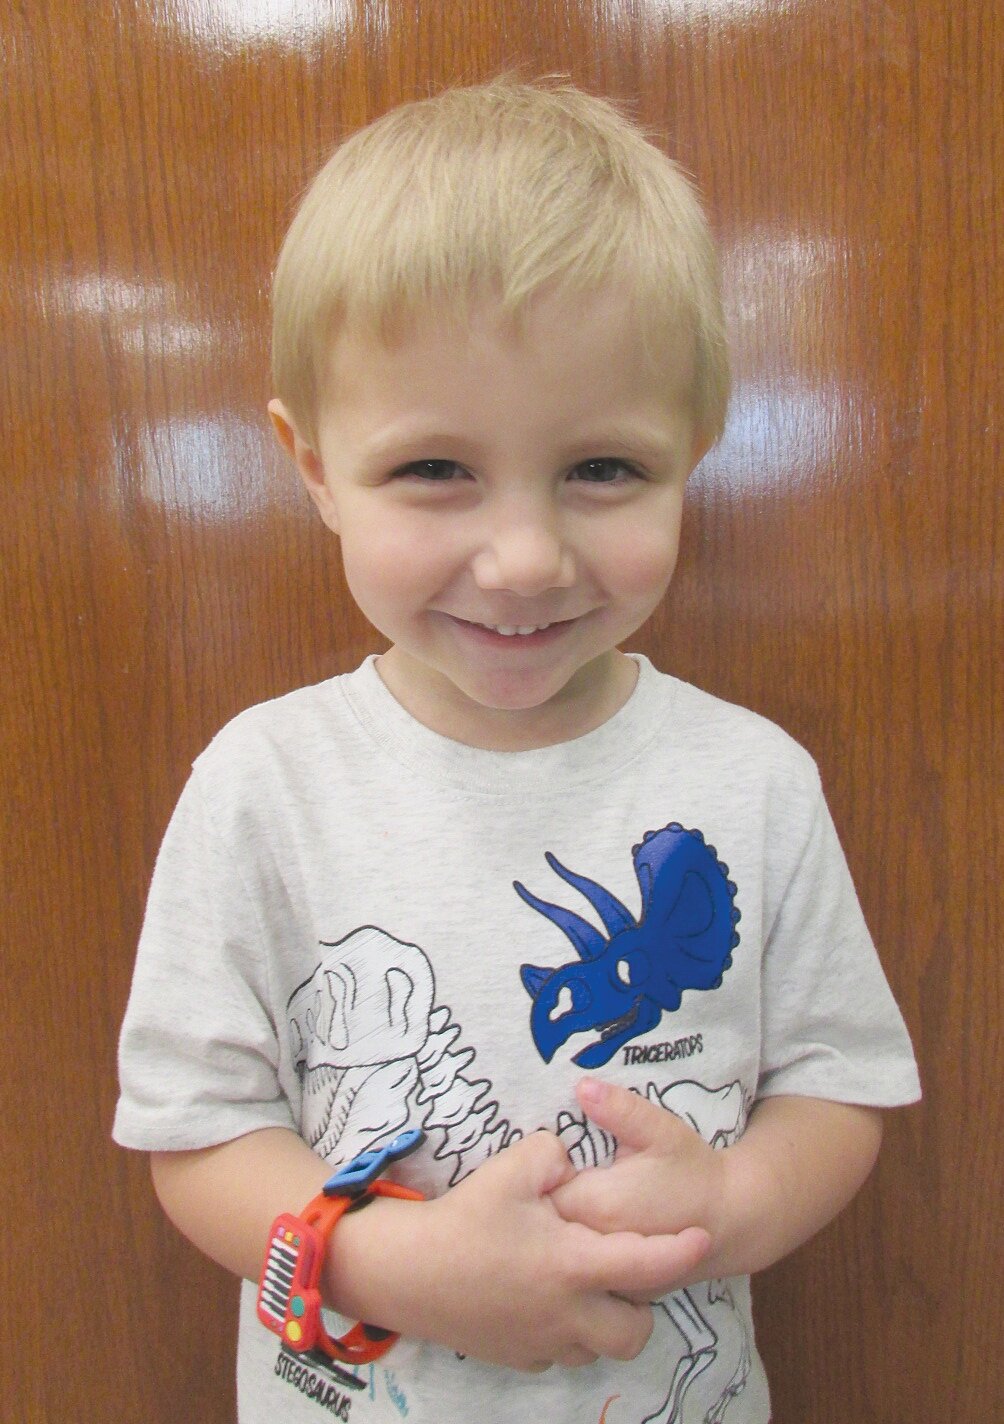 Luke S., age 4, has completed the Crawfordsville District Public Library program "1,000 Books Before Kindergarten" for the fifth time. Luke, along with his parents Bret and Jean, have read 5,000 books. His favorite book is the Magic Tree House series (including Research Guides and Fact Trackers) by Mary Pope Osborne. Mom said, "Thank you to the CDPL and staff for their support and encouragement as Luke participated in the 1,000 Books Before Kindergarten program. As a parent, it is so inspiring to see your child's love for reading develop and grow. The quality time spent together to achieve this is also so rewarding. Luke's passion to read continues to strengthen especially when he realized he can now read. We will continue to support him as his interest in chapter books and nonfiction books begins. An endless journey awaits him."